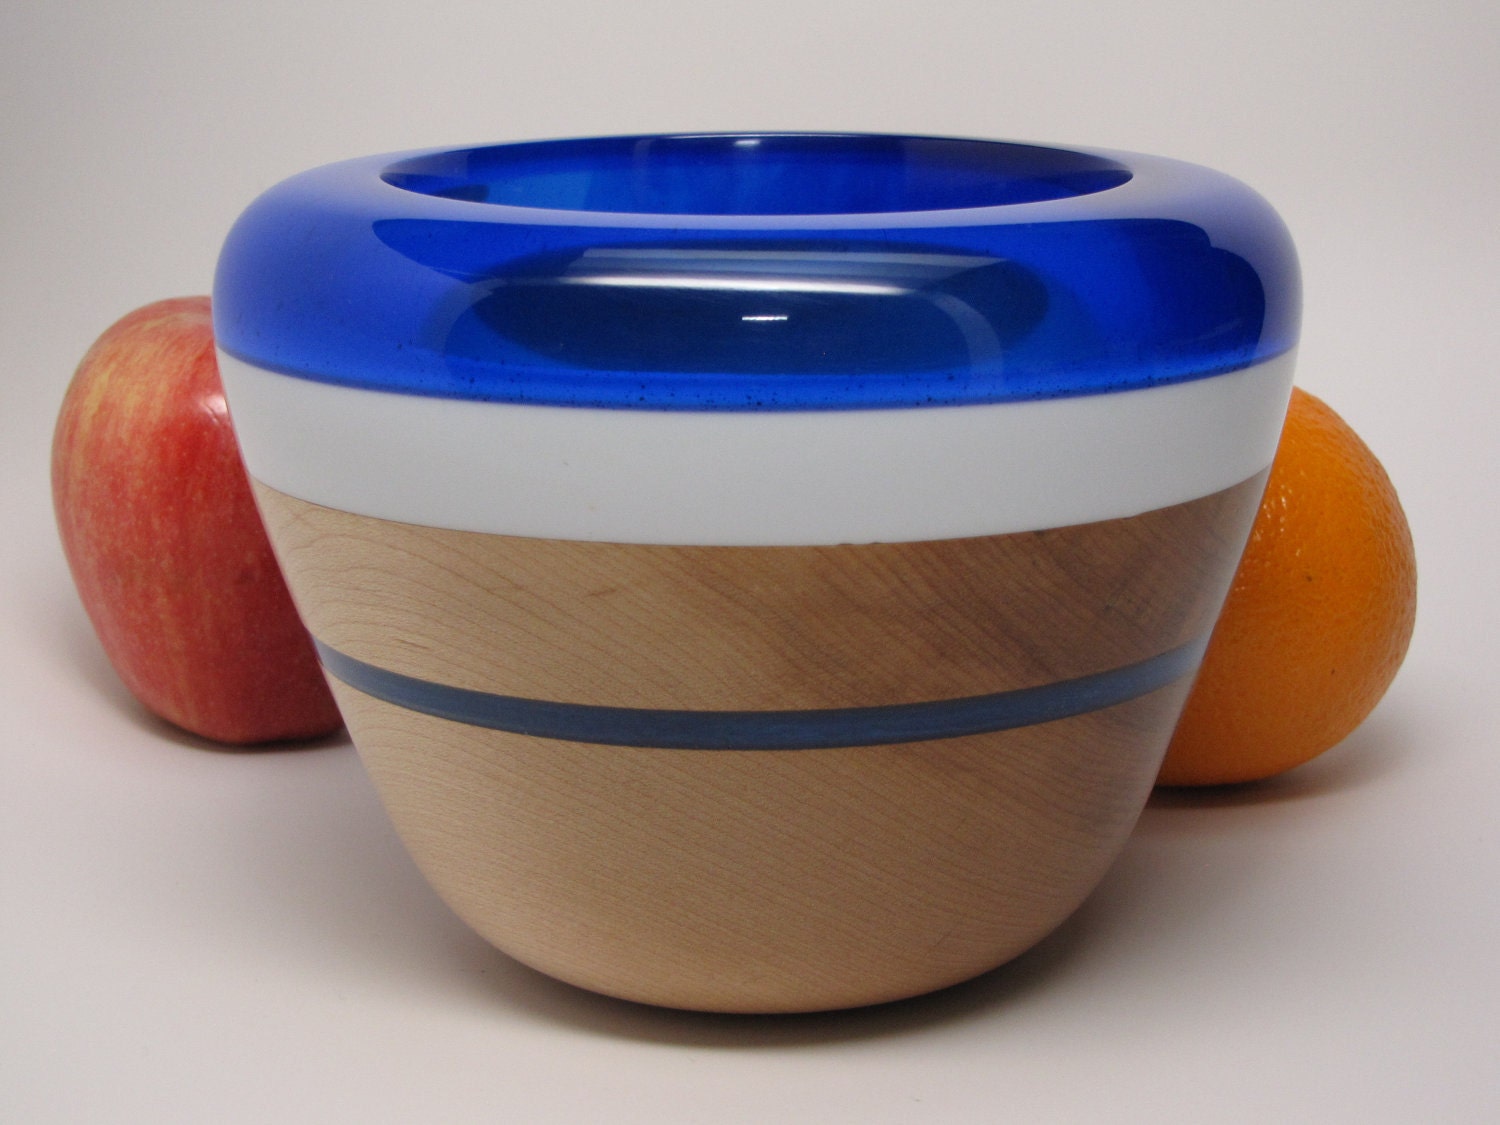 Hand Crafted Hard Maple Bowl with a Clear Dark Blue and Lite Blue Resin Lip